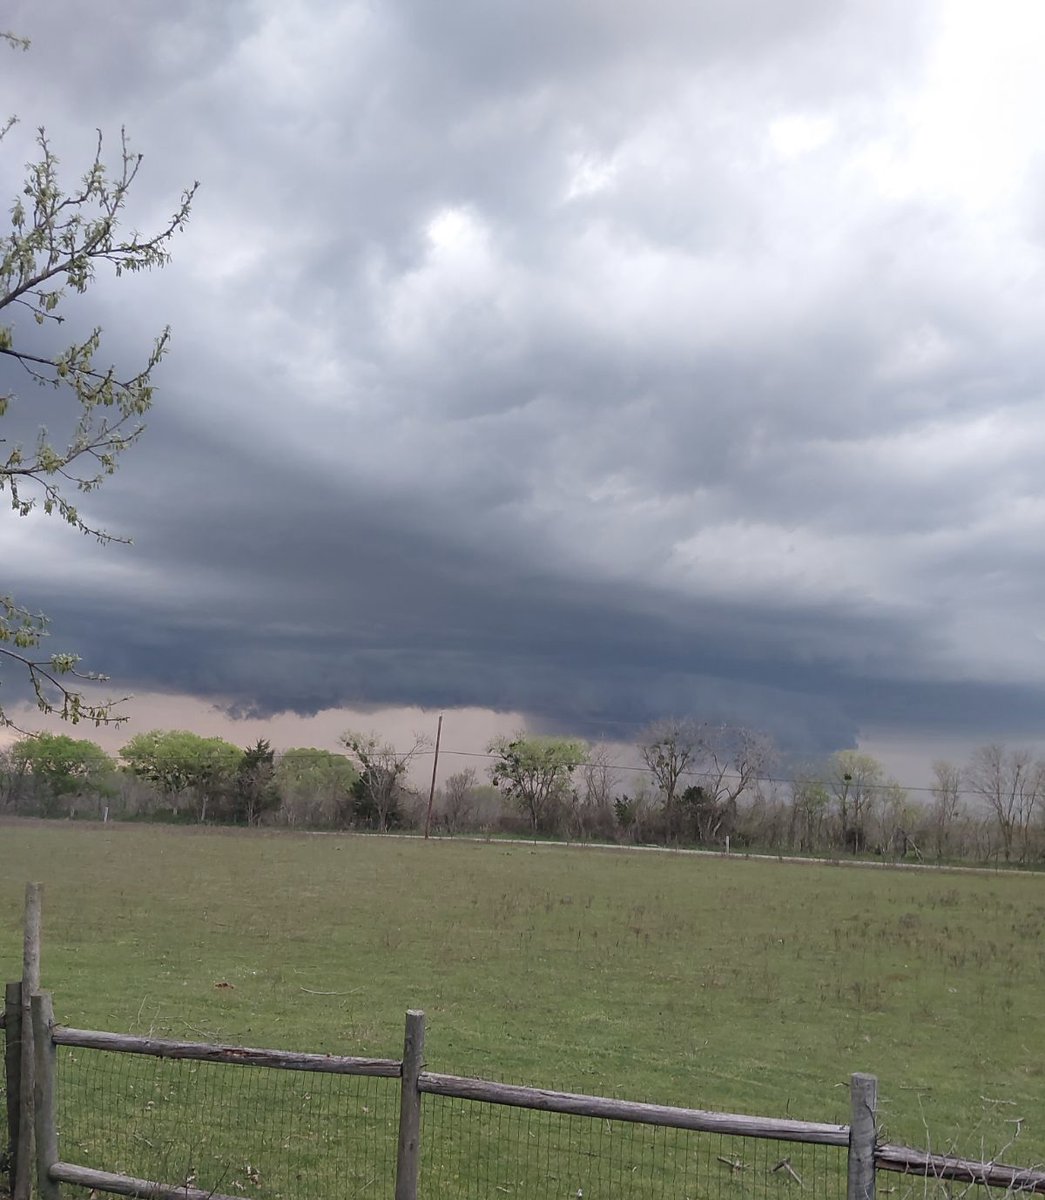 WIDE AS THE TEXAS SKY: INCOMING STORMS pt 2 -  Limestone Co - 03/08/24 6:15PM Storm Spotter D Snow
#txwx #ctxwx #Texas